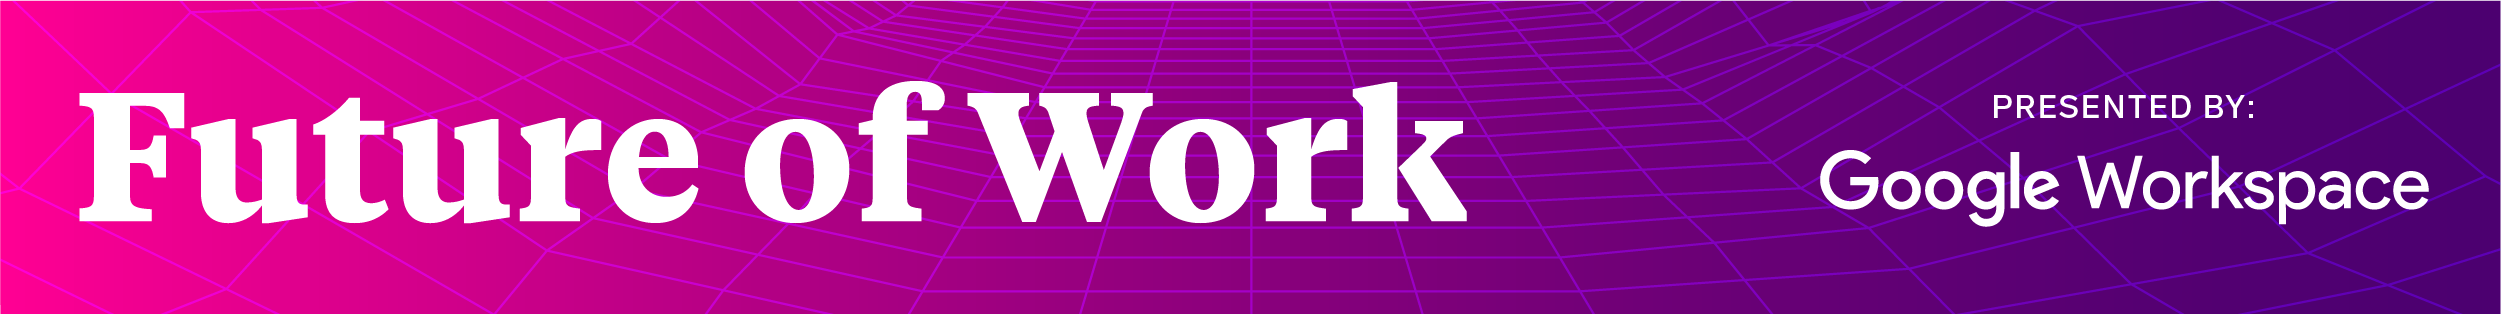 future of work series banner